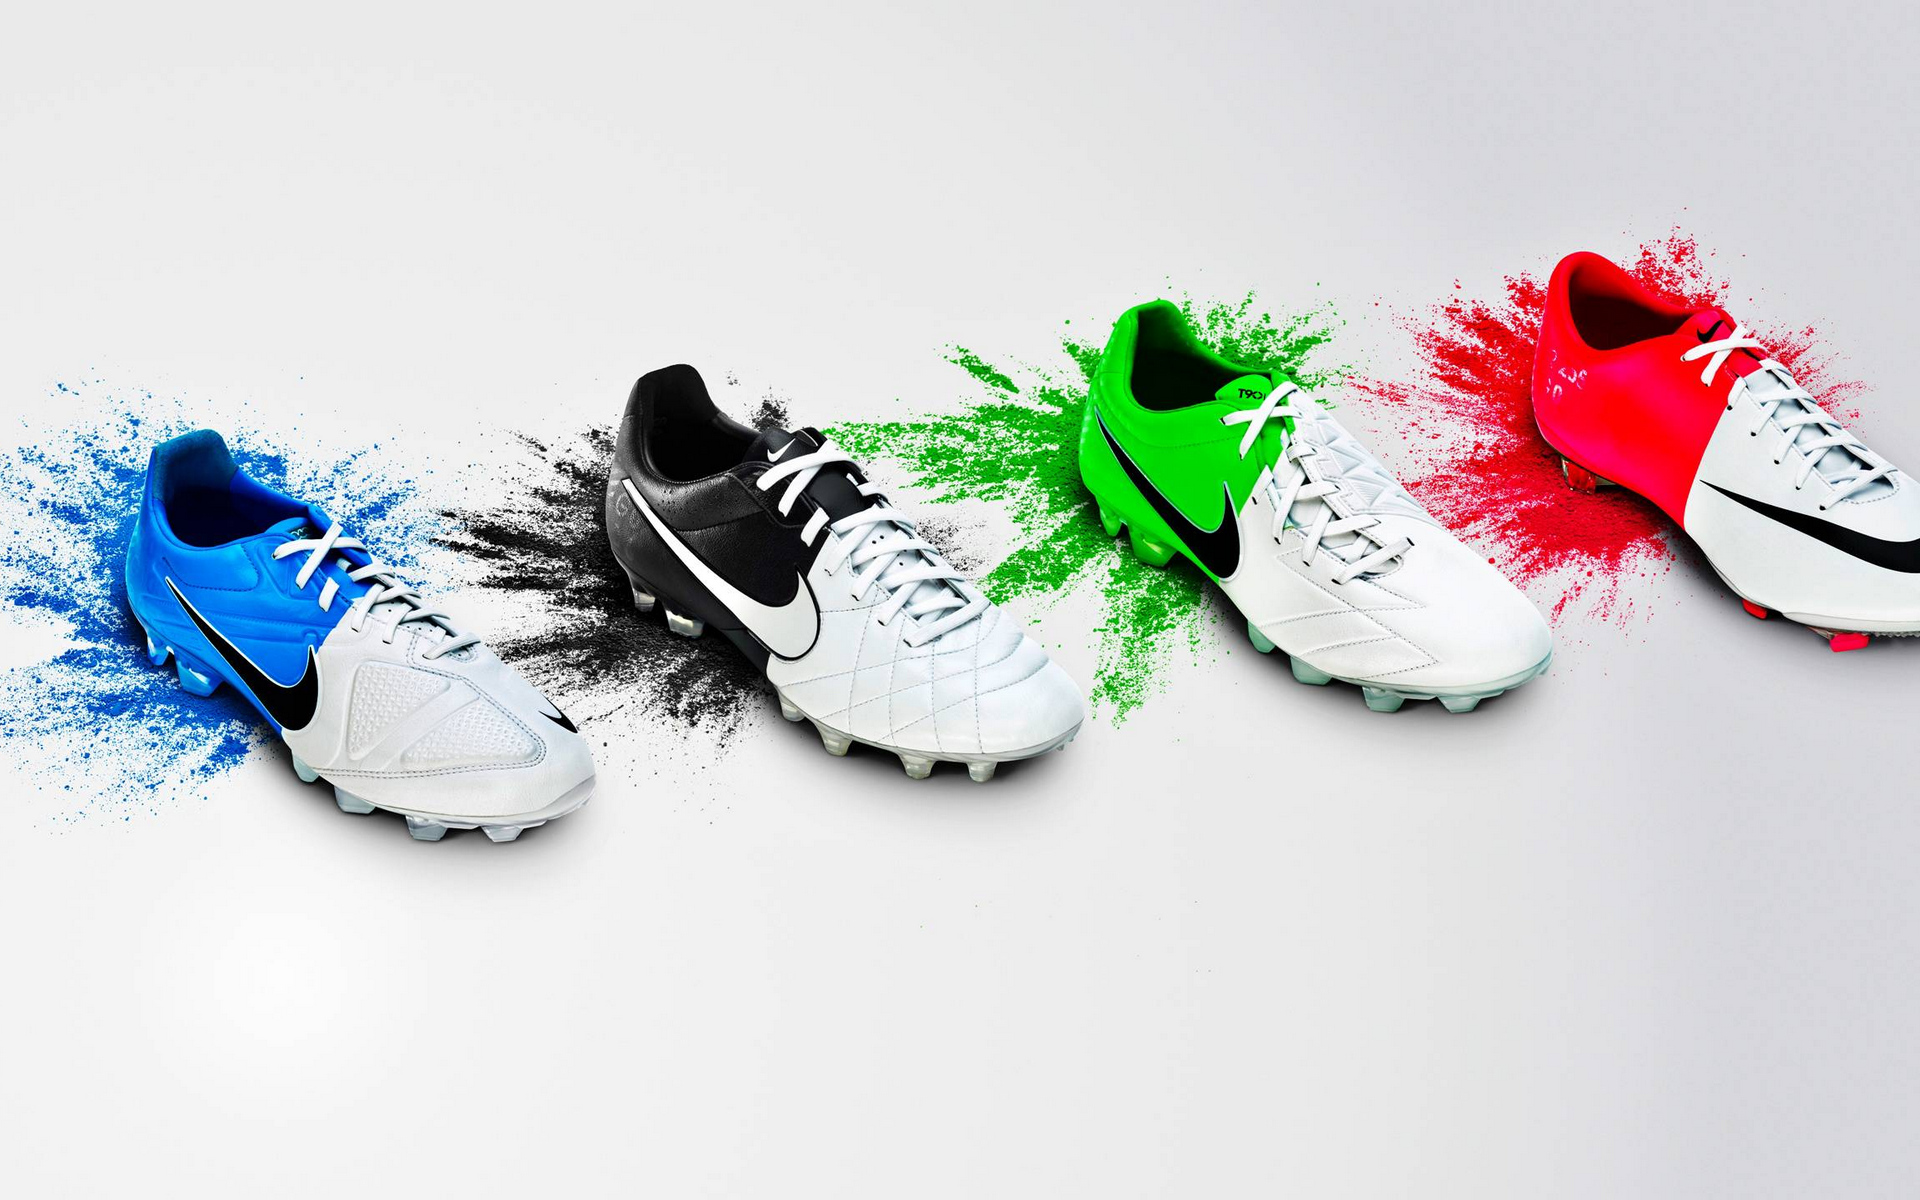 Wallpapers shoes nike soccer players shoes on the desktop